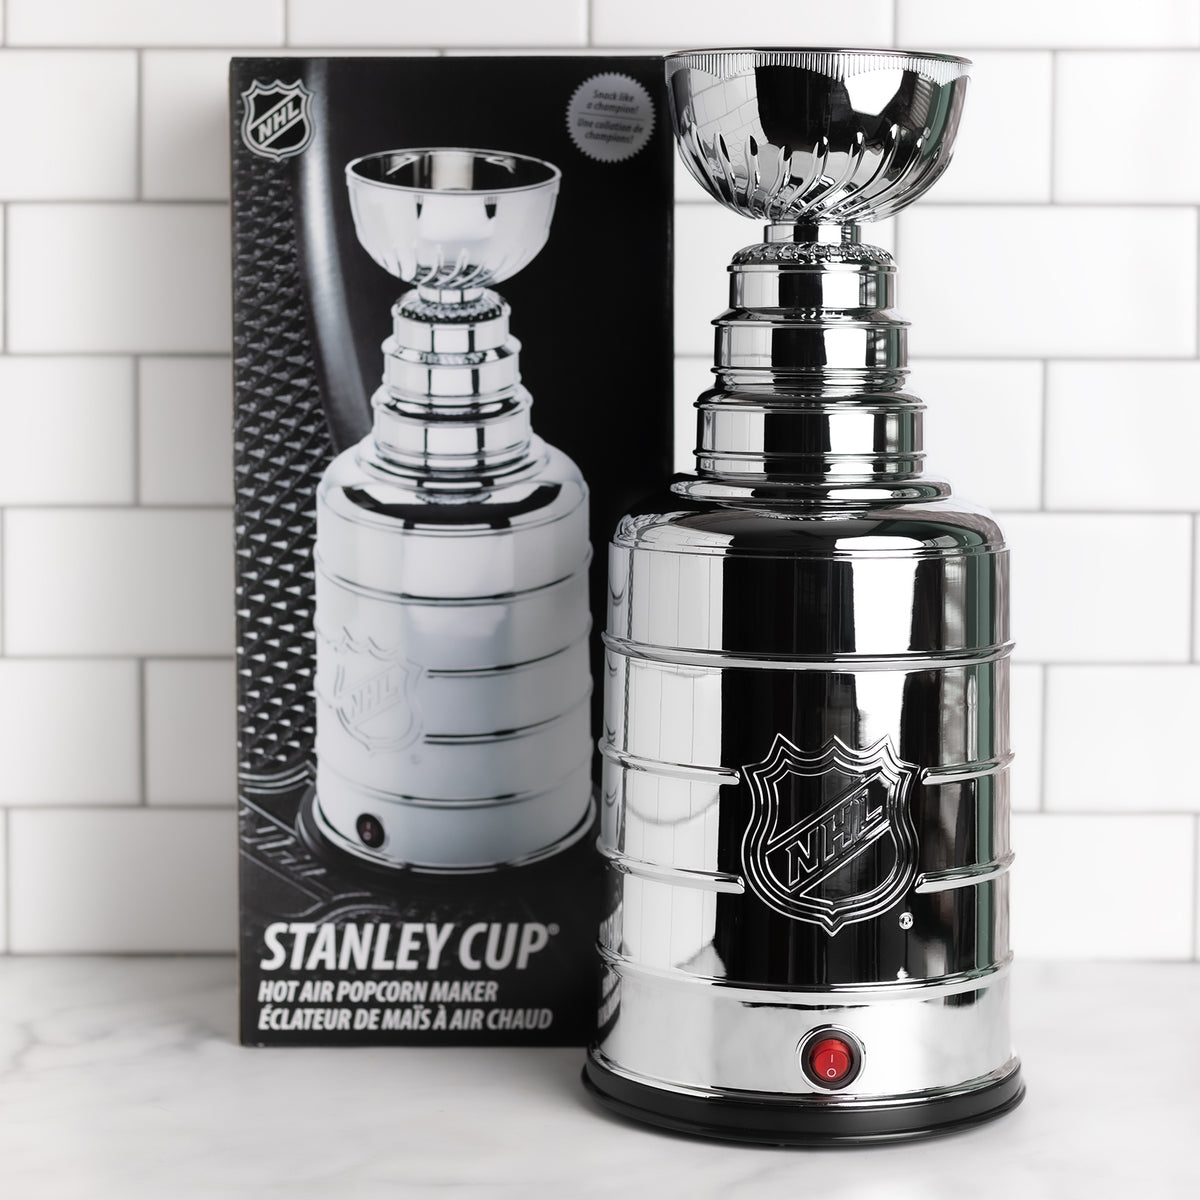 Miniature Stanley Cup 